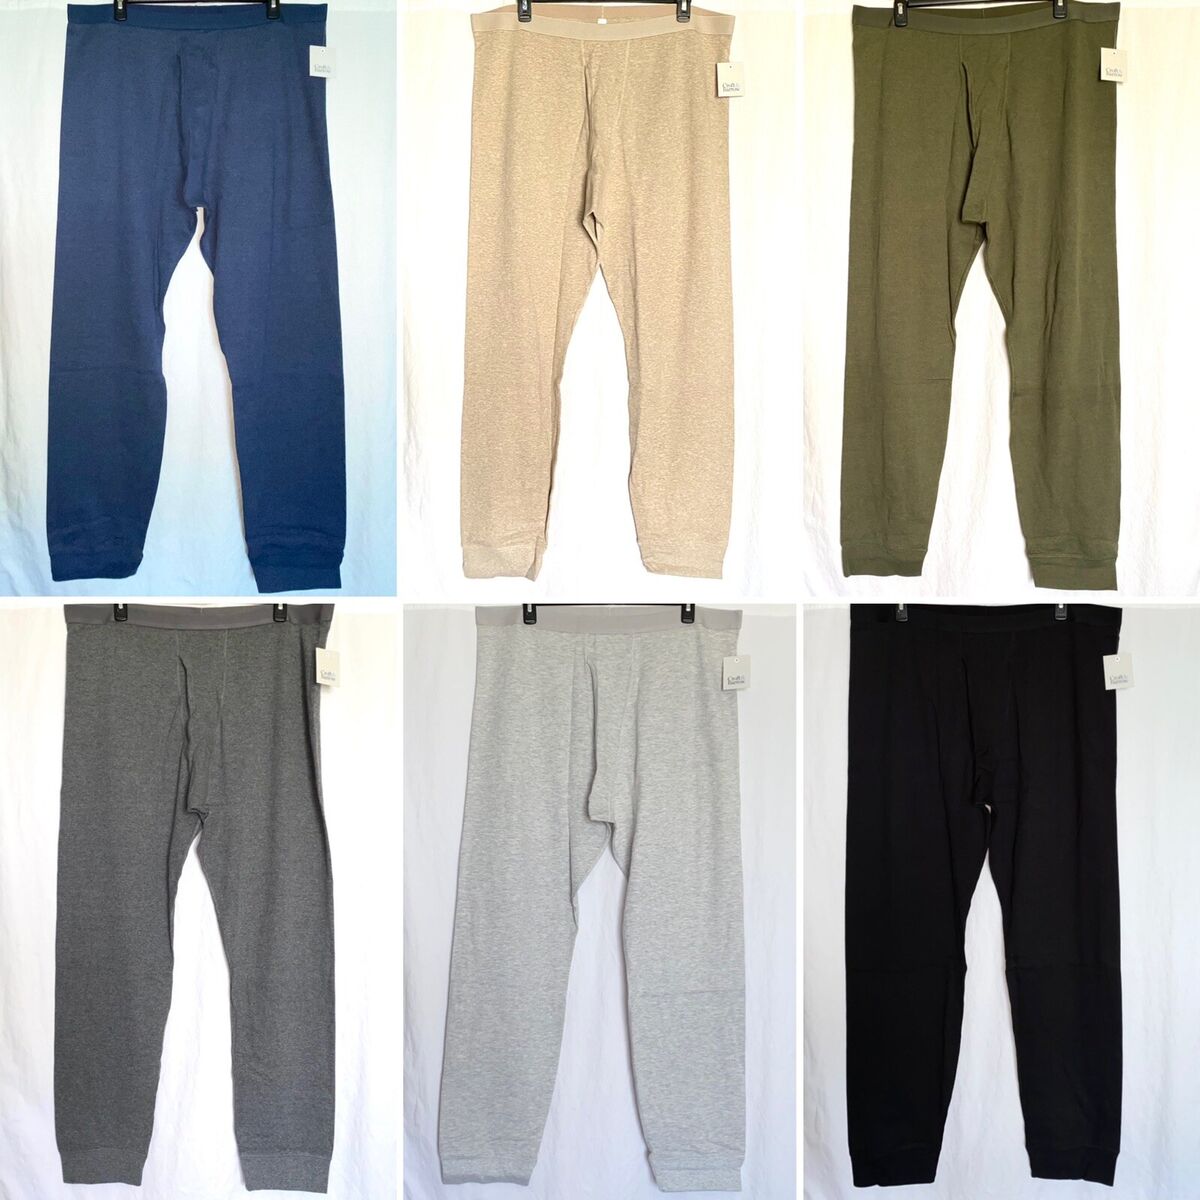 3XL Mens Thermal Pants Lot NEW Long Underwear Big and Tall 3XLT from Kohls  nwt